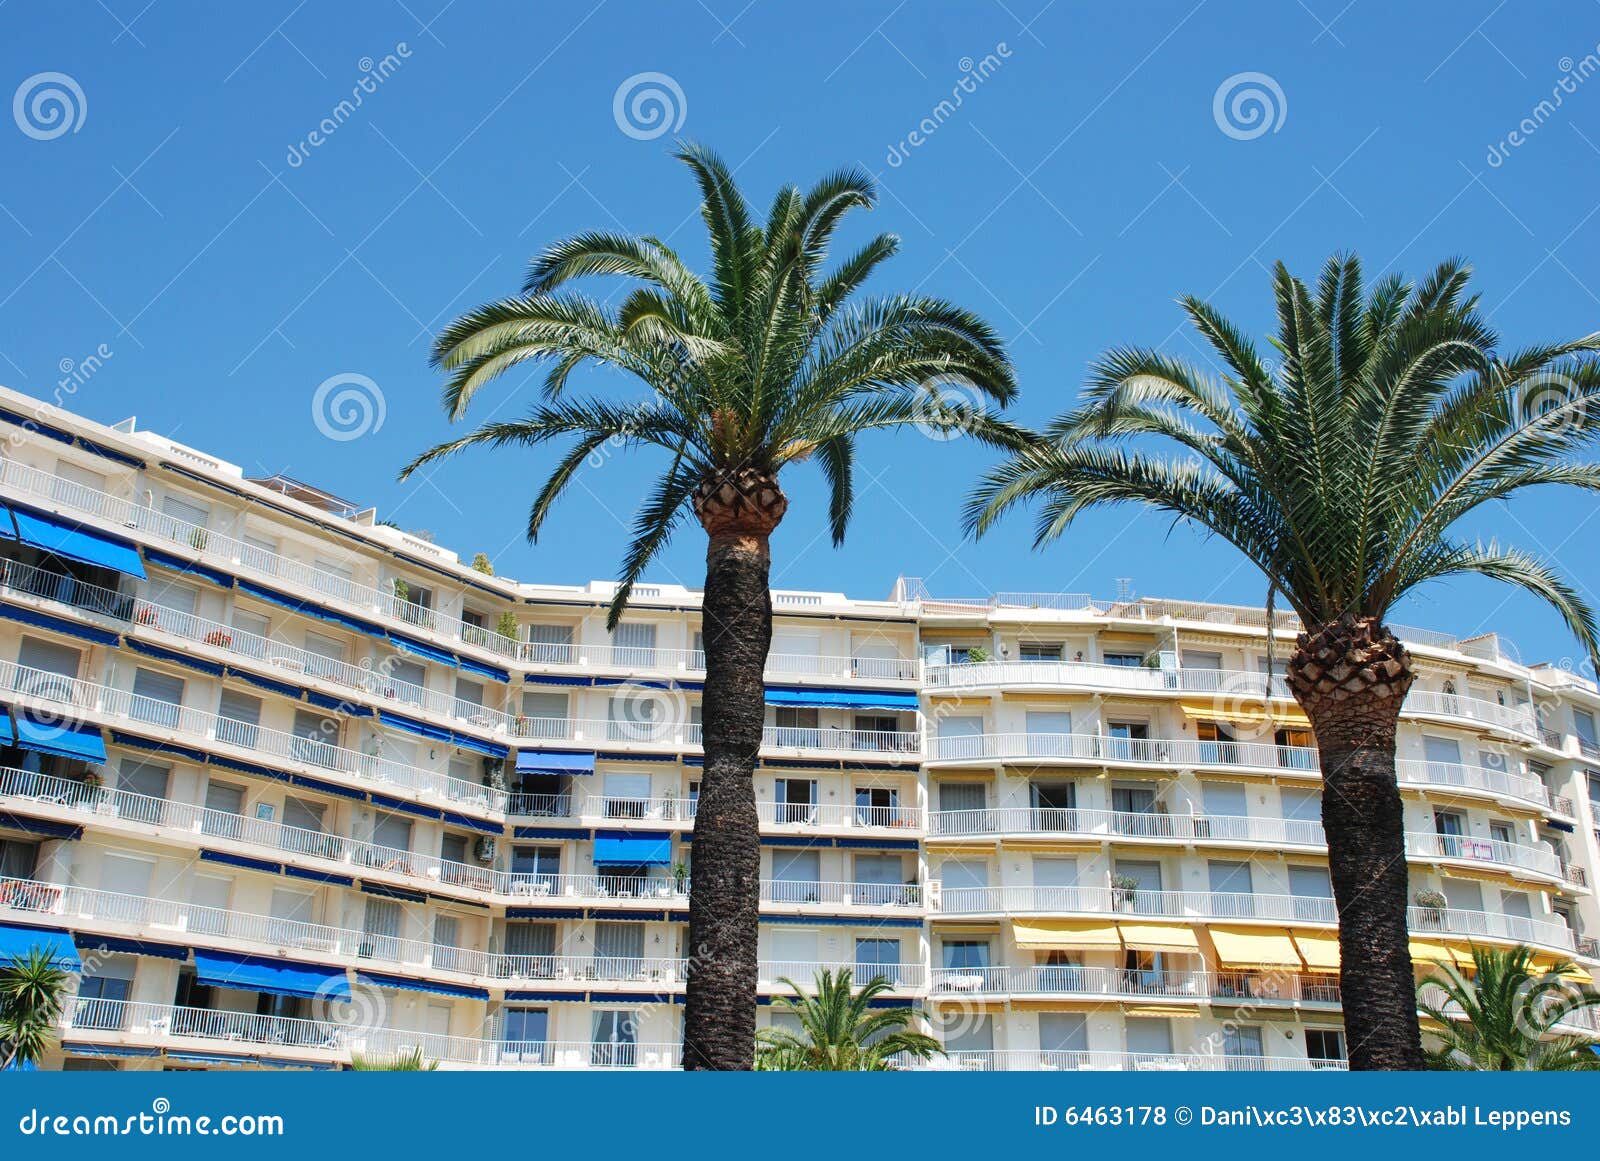 hotel with palmtrees